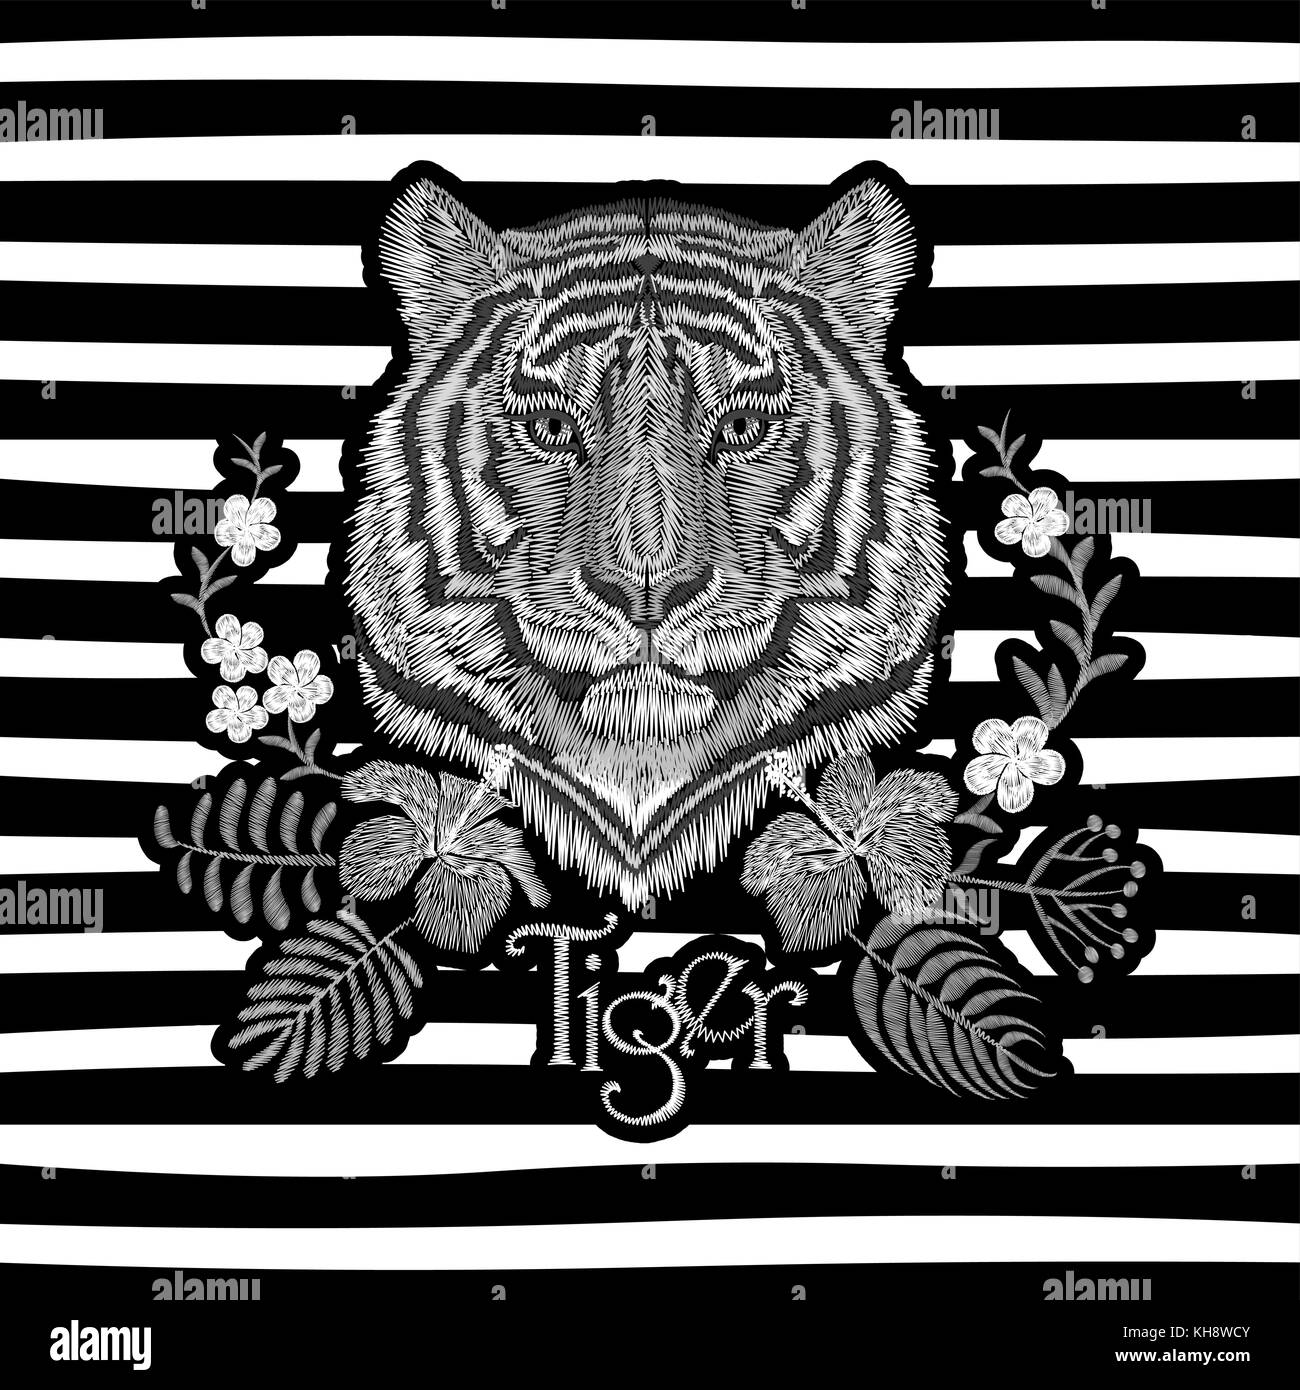 White embroidery realistic texture tiger face patch. Fashion floral print textile decoration design with inscription vector illustration striped background Stock Vector